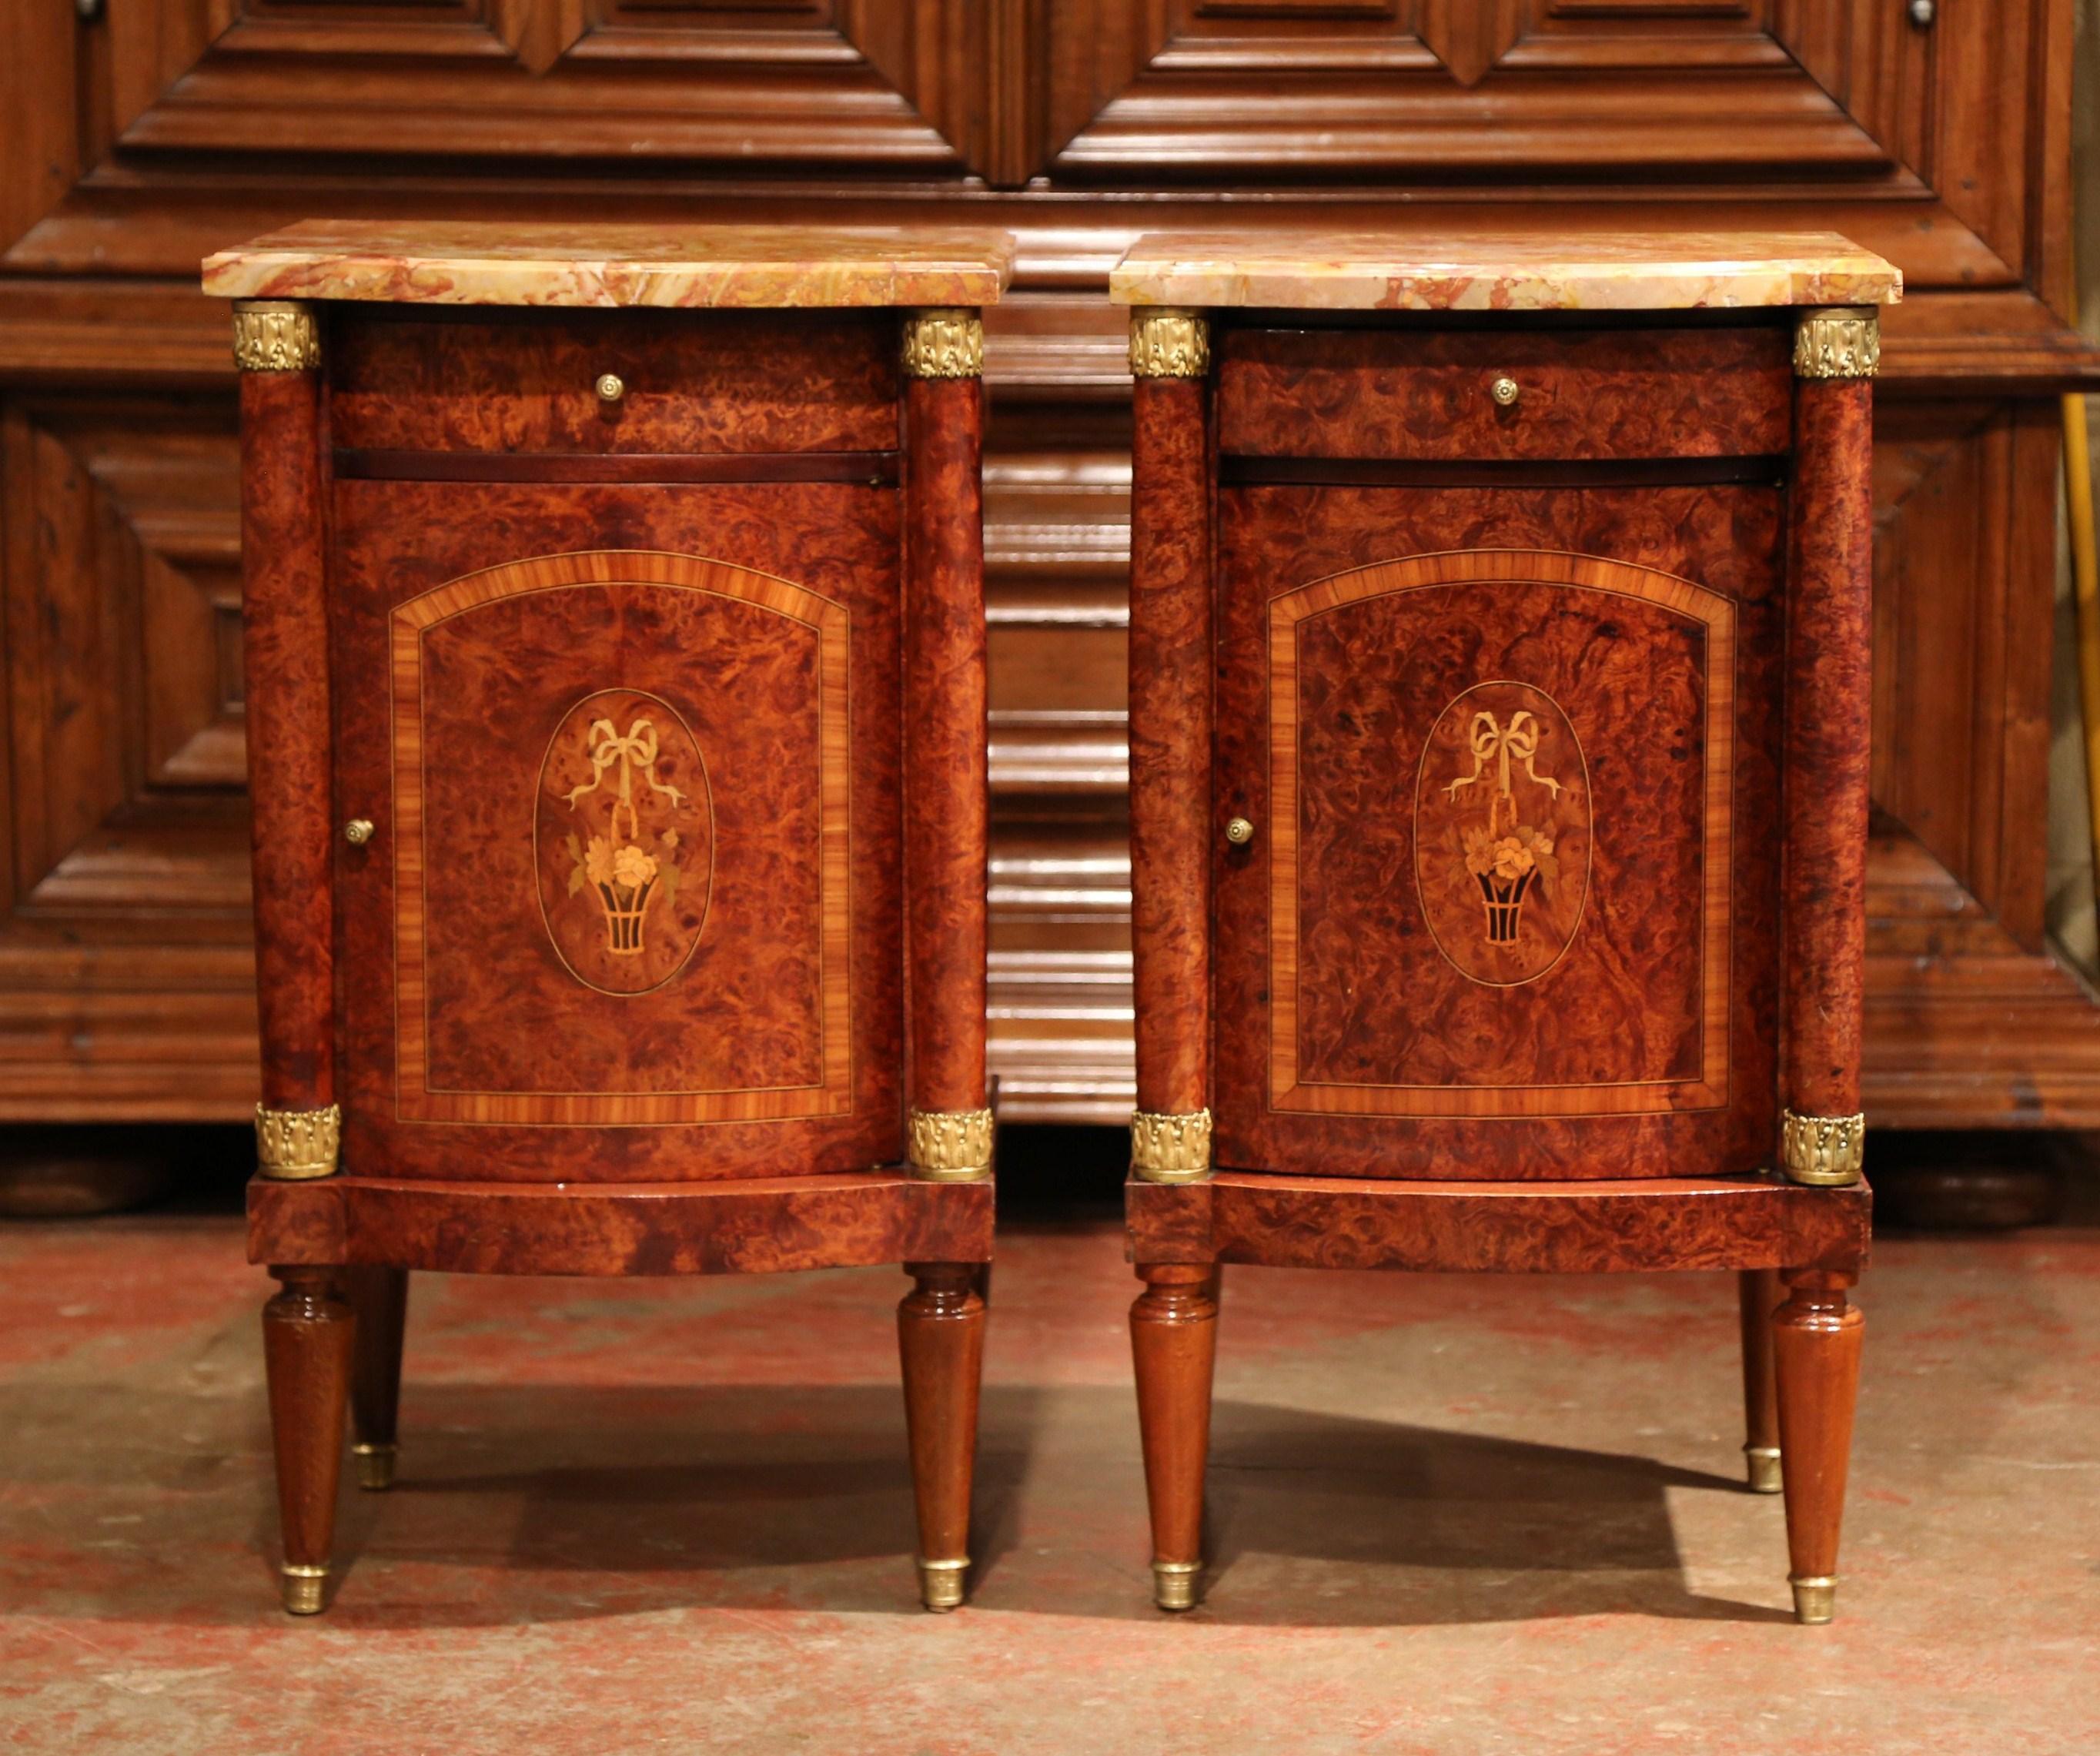 This elegant pair of antique fruitwood nightstands was created in France, circa 1890. Rectangular in shape, the burl walnut bedside tables sit on four tapered legs and feature a single drawer and a curved centre door. The doors are embellished with